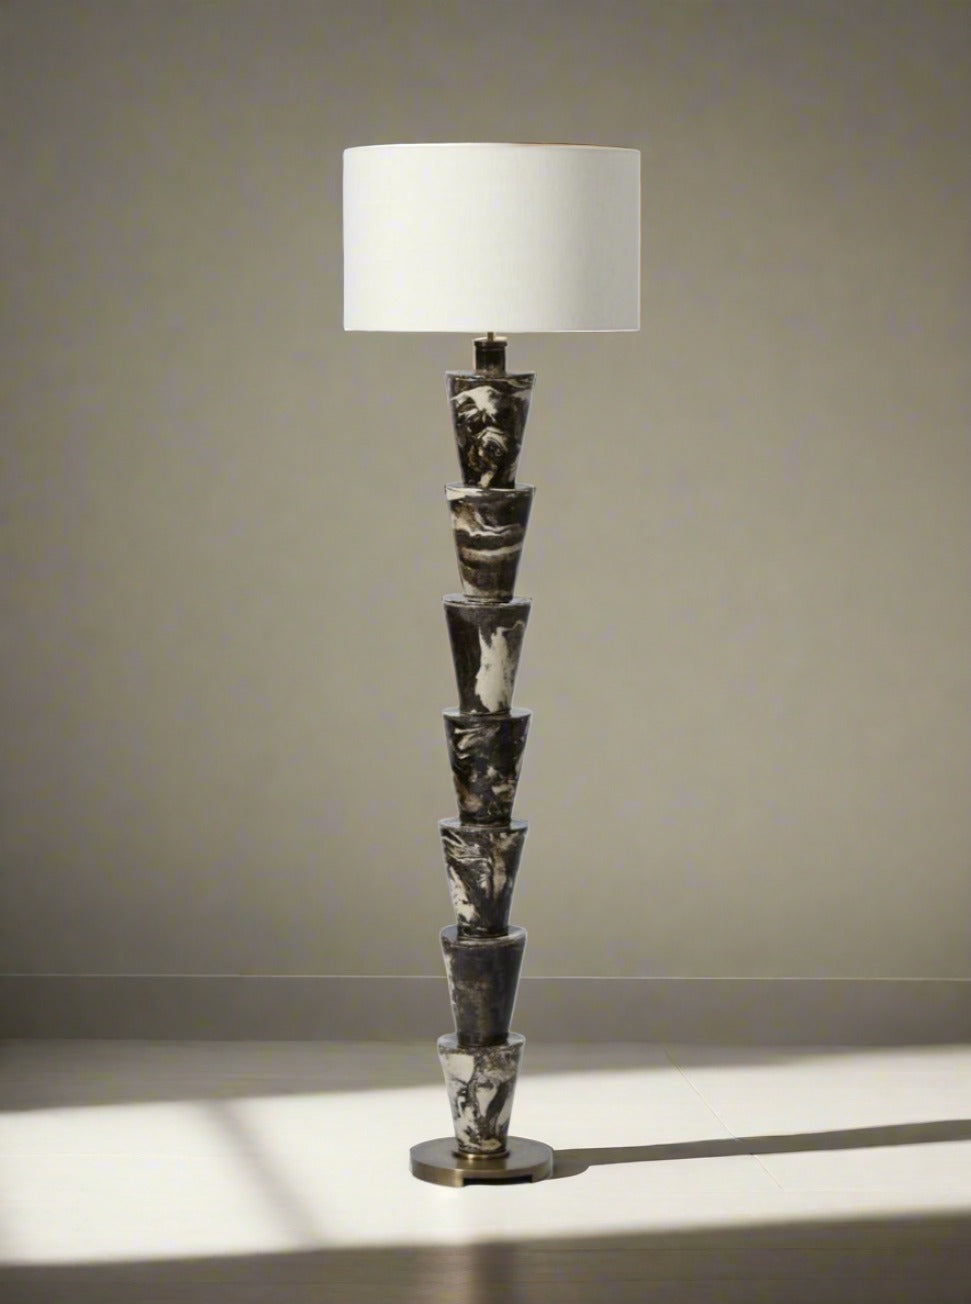 A unique "Nizwa" Floor Lamp by Barracuda Interiors with a series of stacked sculpted figures forming the base, topped with a white cylindrical lampshade. The marble-like base, featuring a predominantly black and white color scheme, stands on an iron base. This stoneware glazed floor lamp is exquisitely made in Portugal.